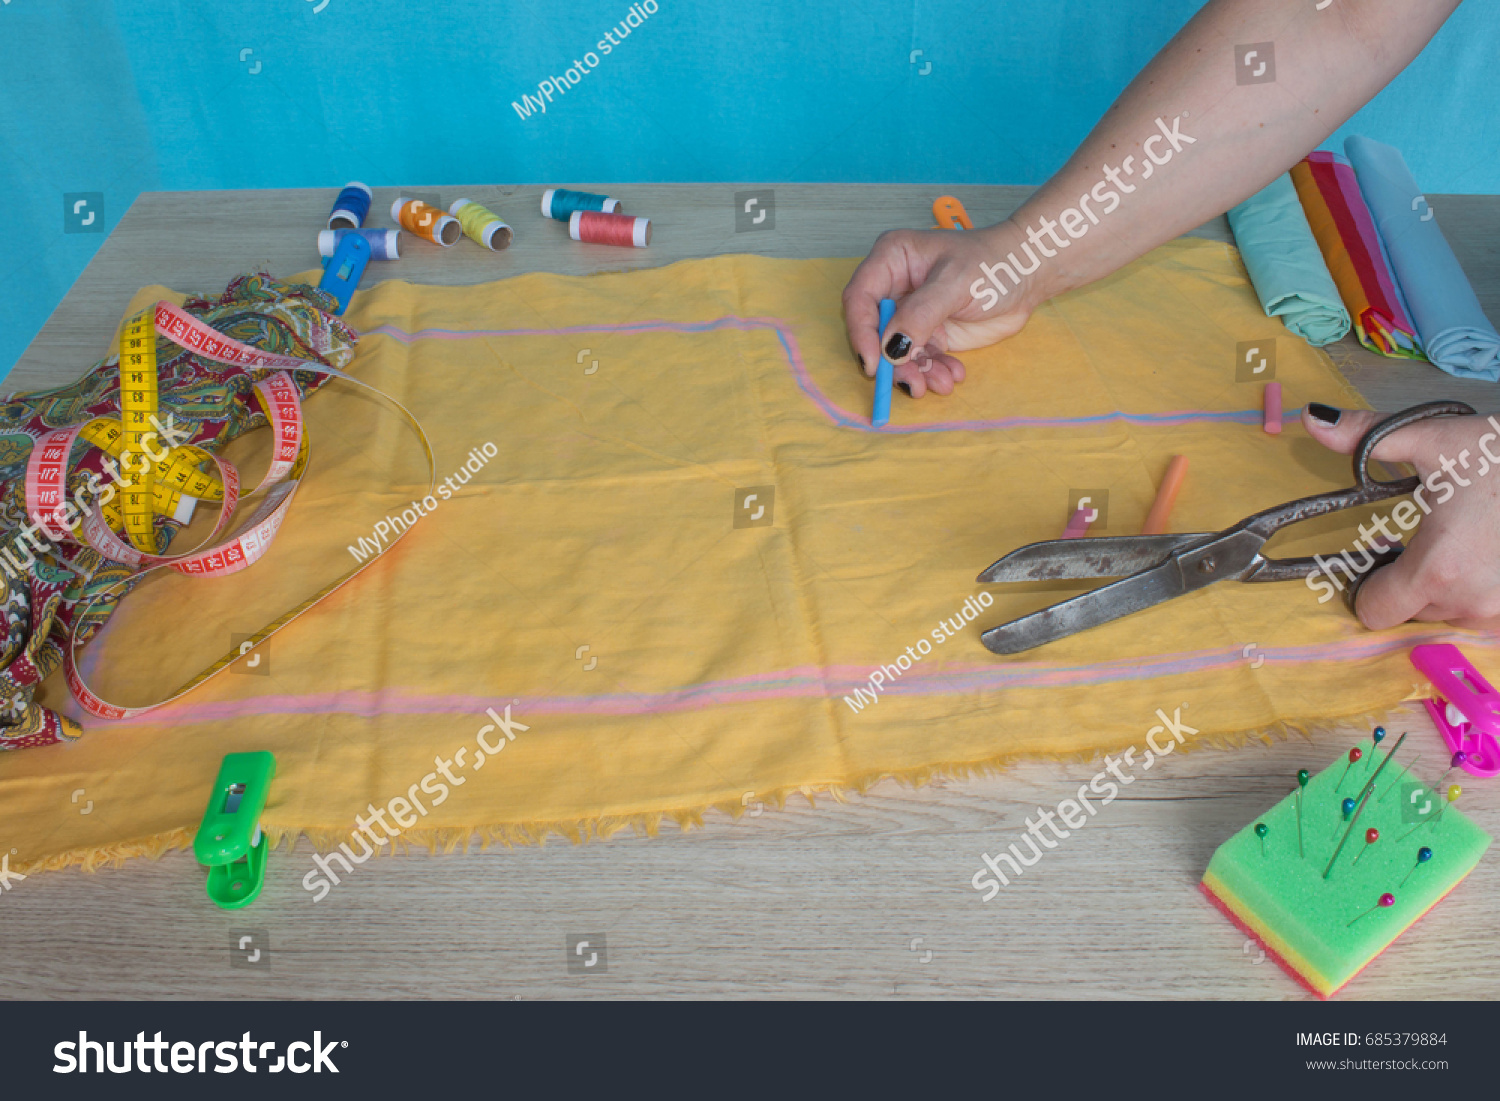 Close up of  woman's hands drawing a pattern on yellow tissue. Measuring tape and sewing accessories. A tailor is laying out a dress/Sewing layout #685379884